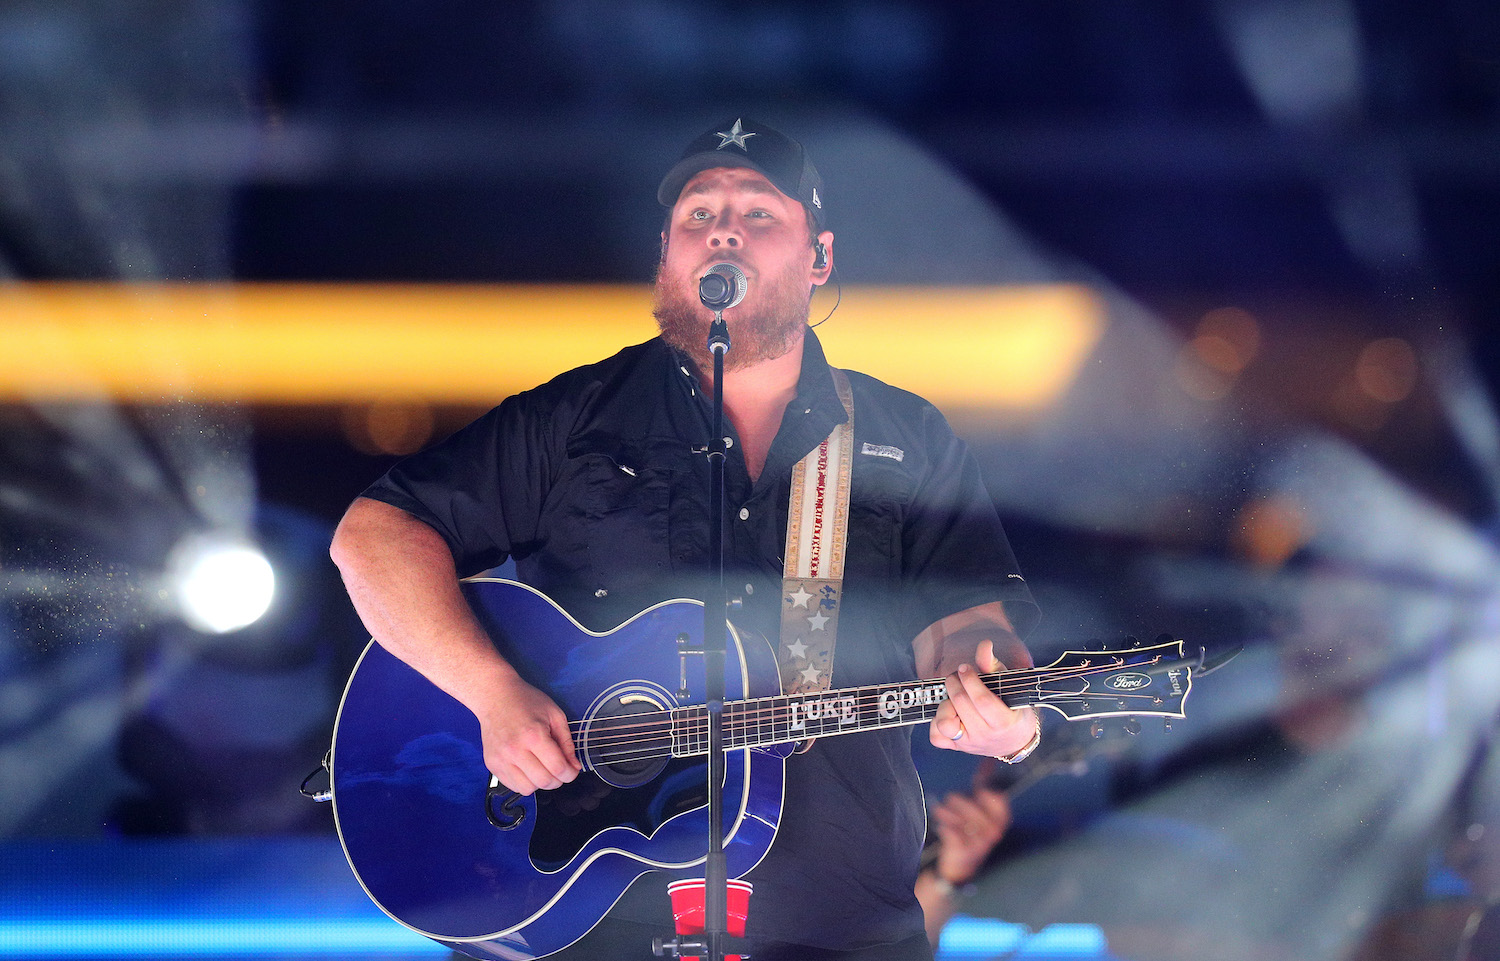 Luke Combs, whose new album drops this summer, performing live with his guitar in 2021